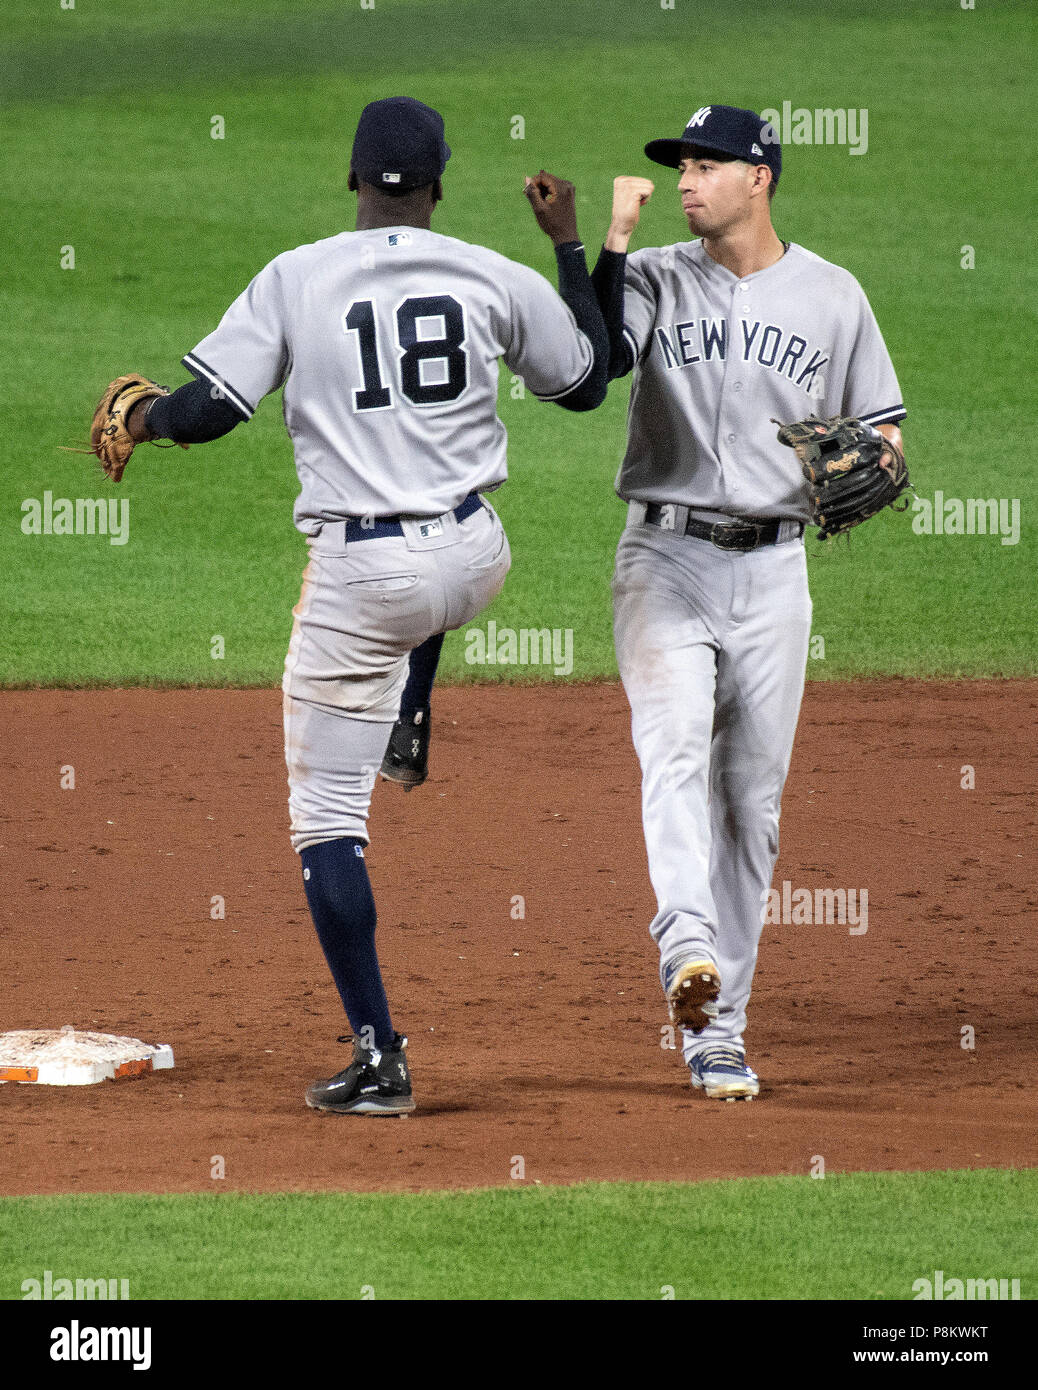 Baltimore, United States Of America. 11th July, 2018. New York Yankees shortstop Didi Gregorius (18) and New York Yankees second baseman Tyler Wade (12) celebrate following their team's 90 - 0 win over the Baltimore Orioles at Oriole Park at Camden Yards in Baltimore, MD on Wednesday, July 11, 2018. The Yankees won the game 9 - 0. Credit: Ron Sachs/CNP (RESTRICTION: NO New York or New Jersey Newspapers or newspapers within a 75 mile radius of New York City) | usage worldwide Credit: dpa/Alamy Live News Stock Photo